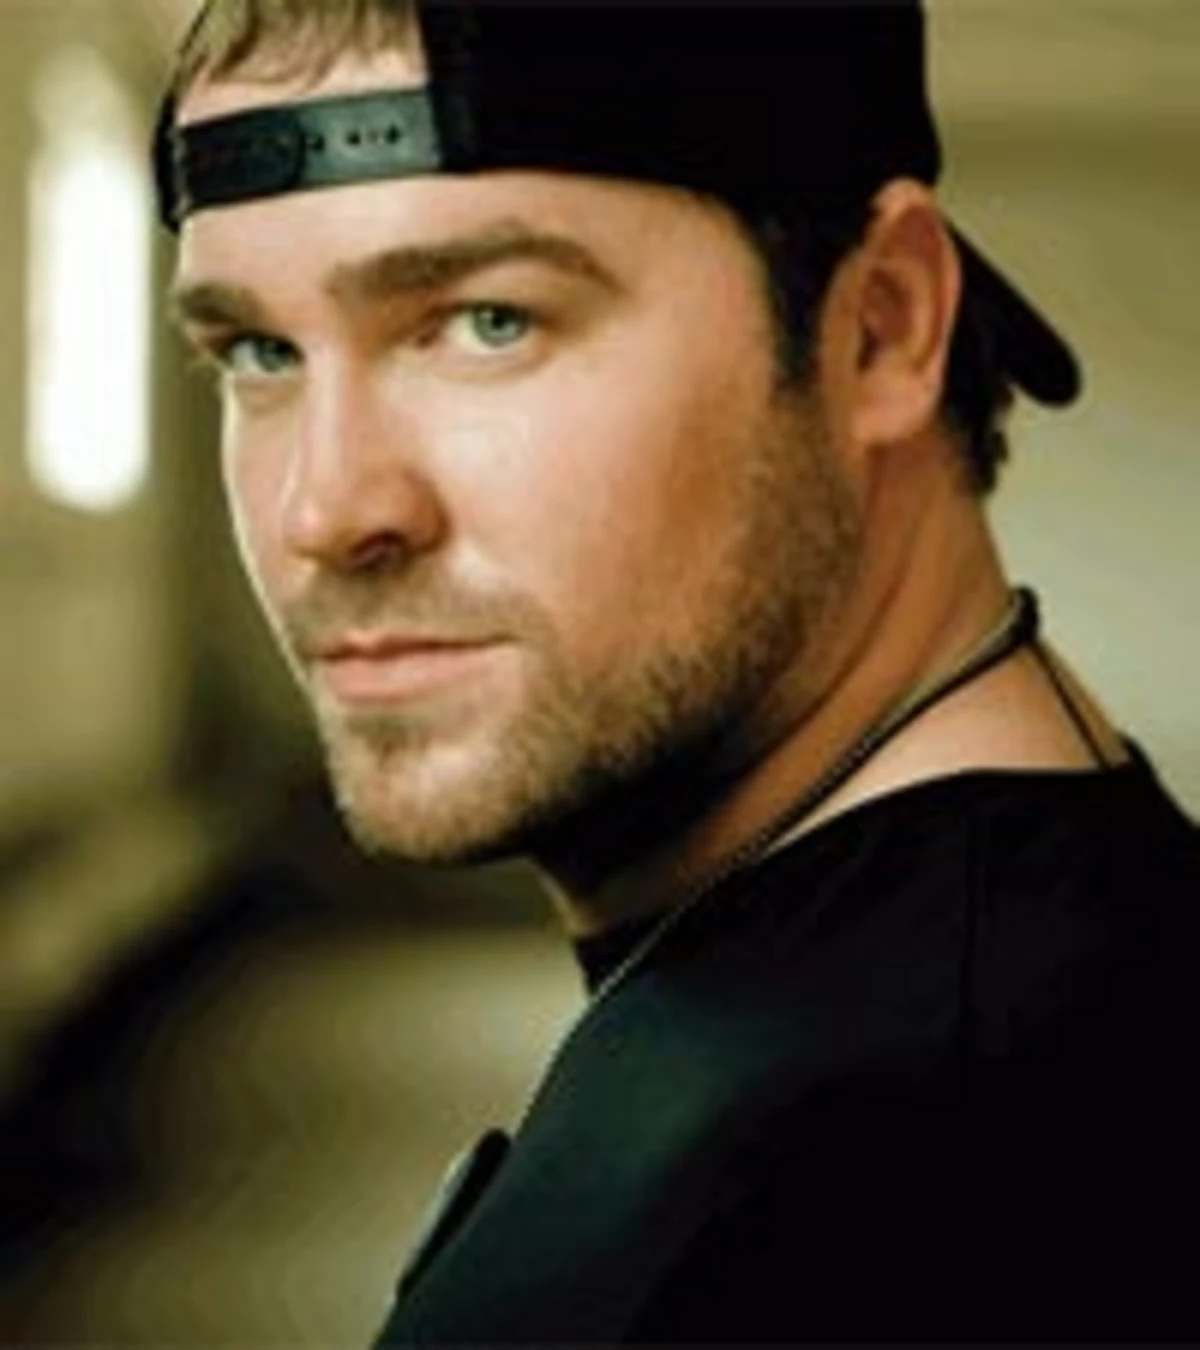 Lee Brice Ends ‘Crazy’ Year With Billboard’s Hottest Country Song